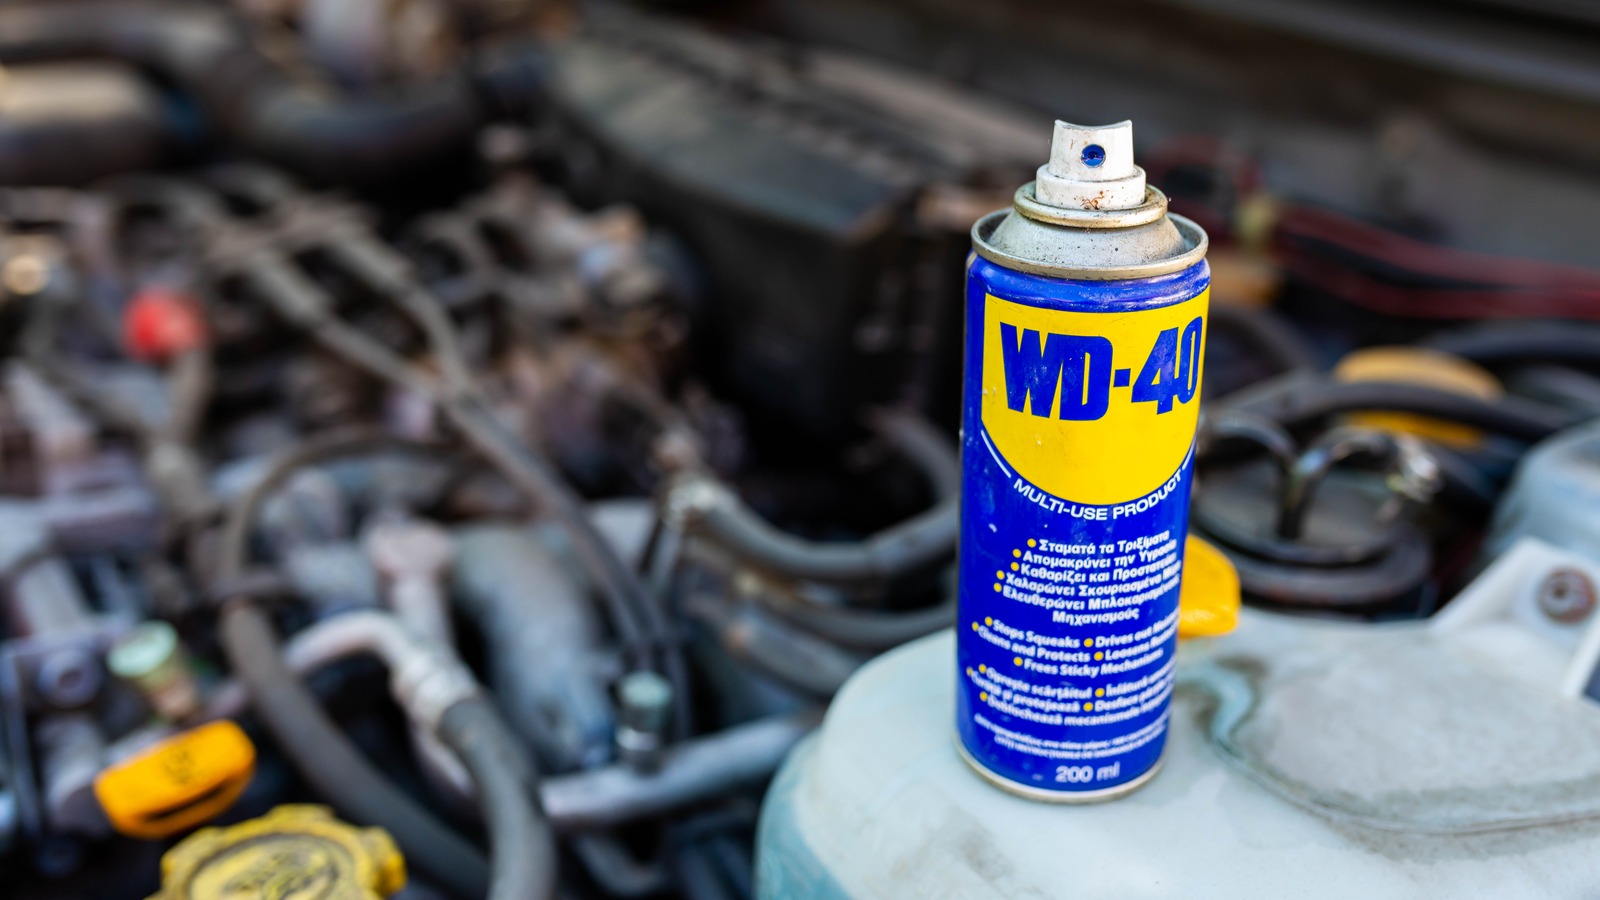 17 Totally Genius Things You Didn't Know You Could Do With WD-40 — Best Life